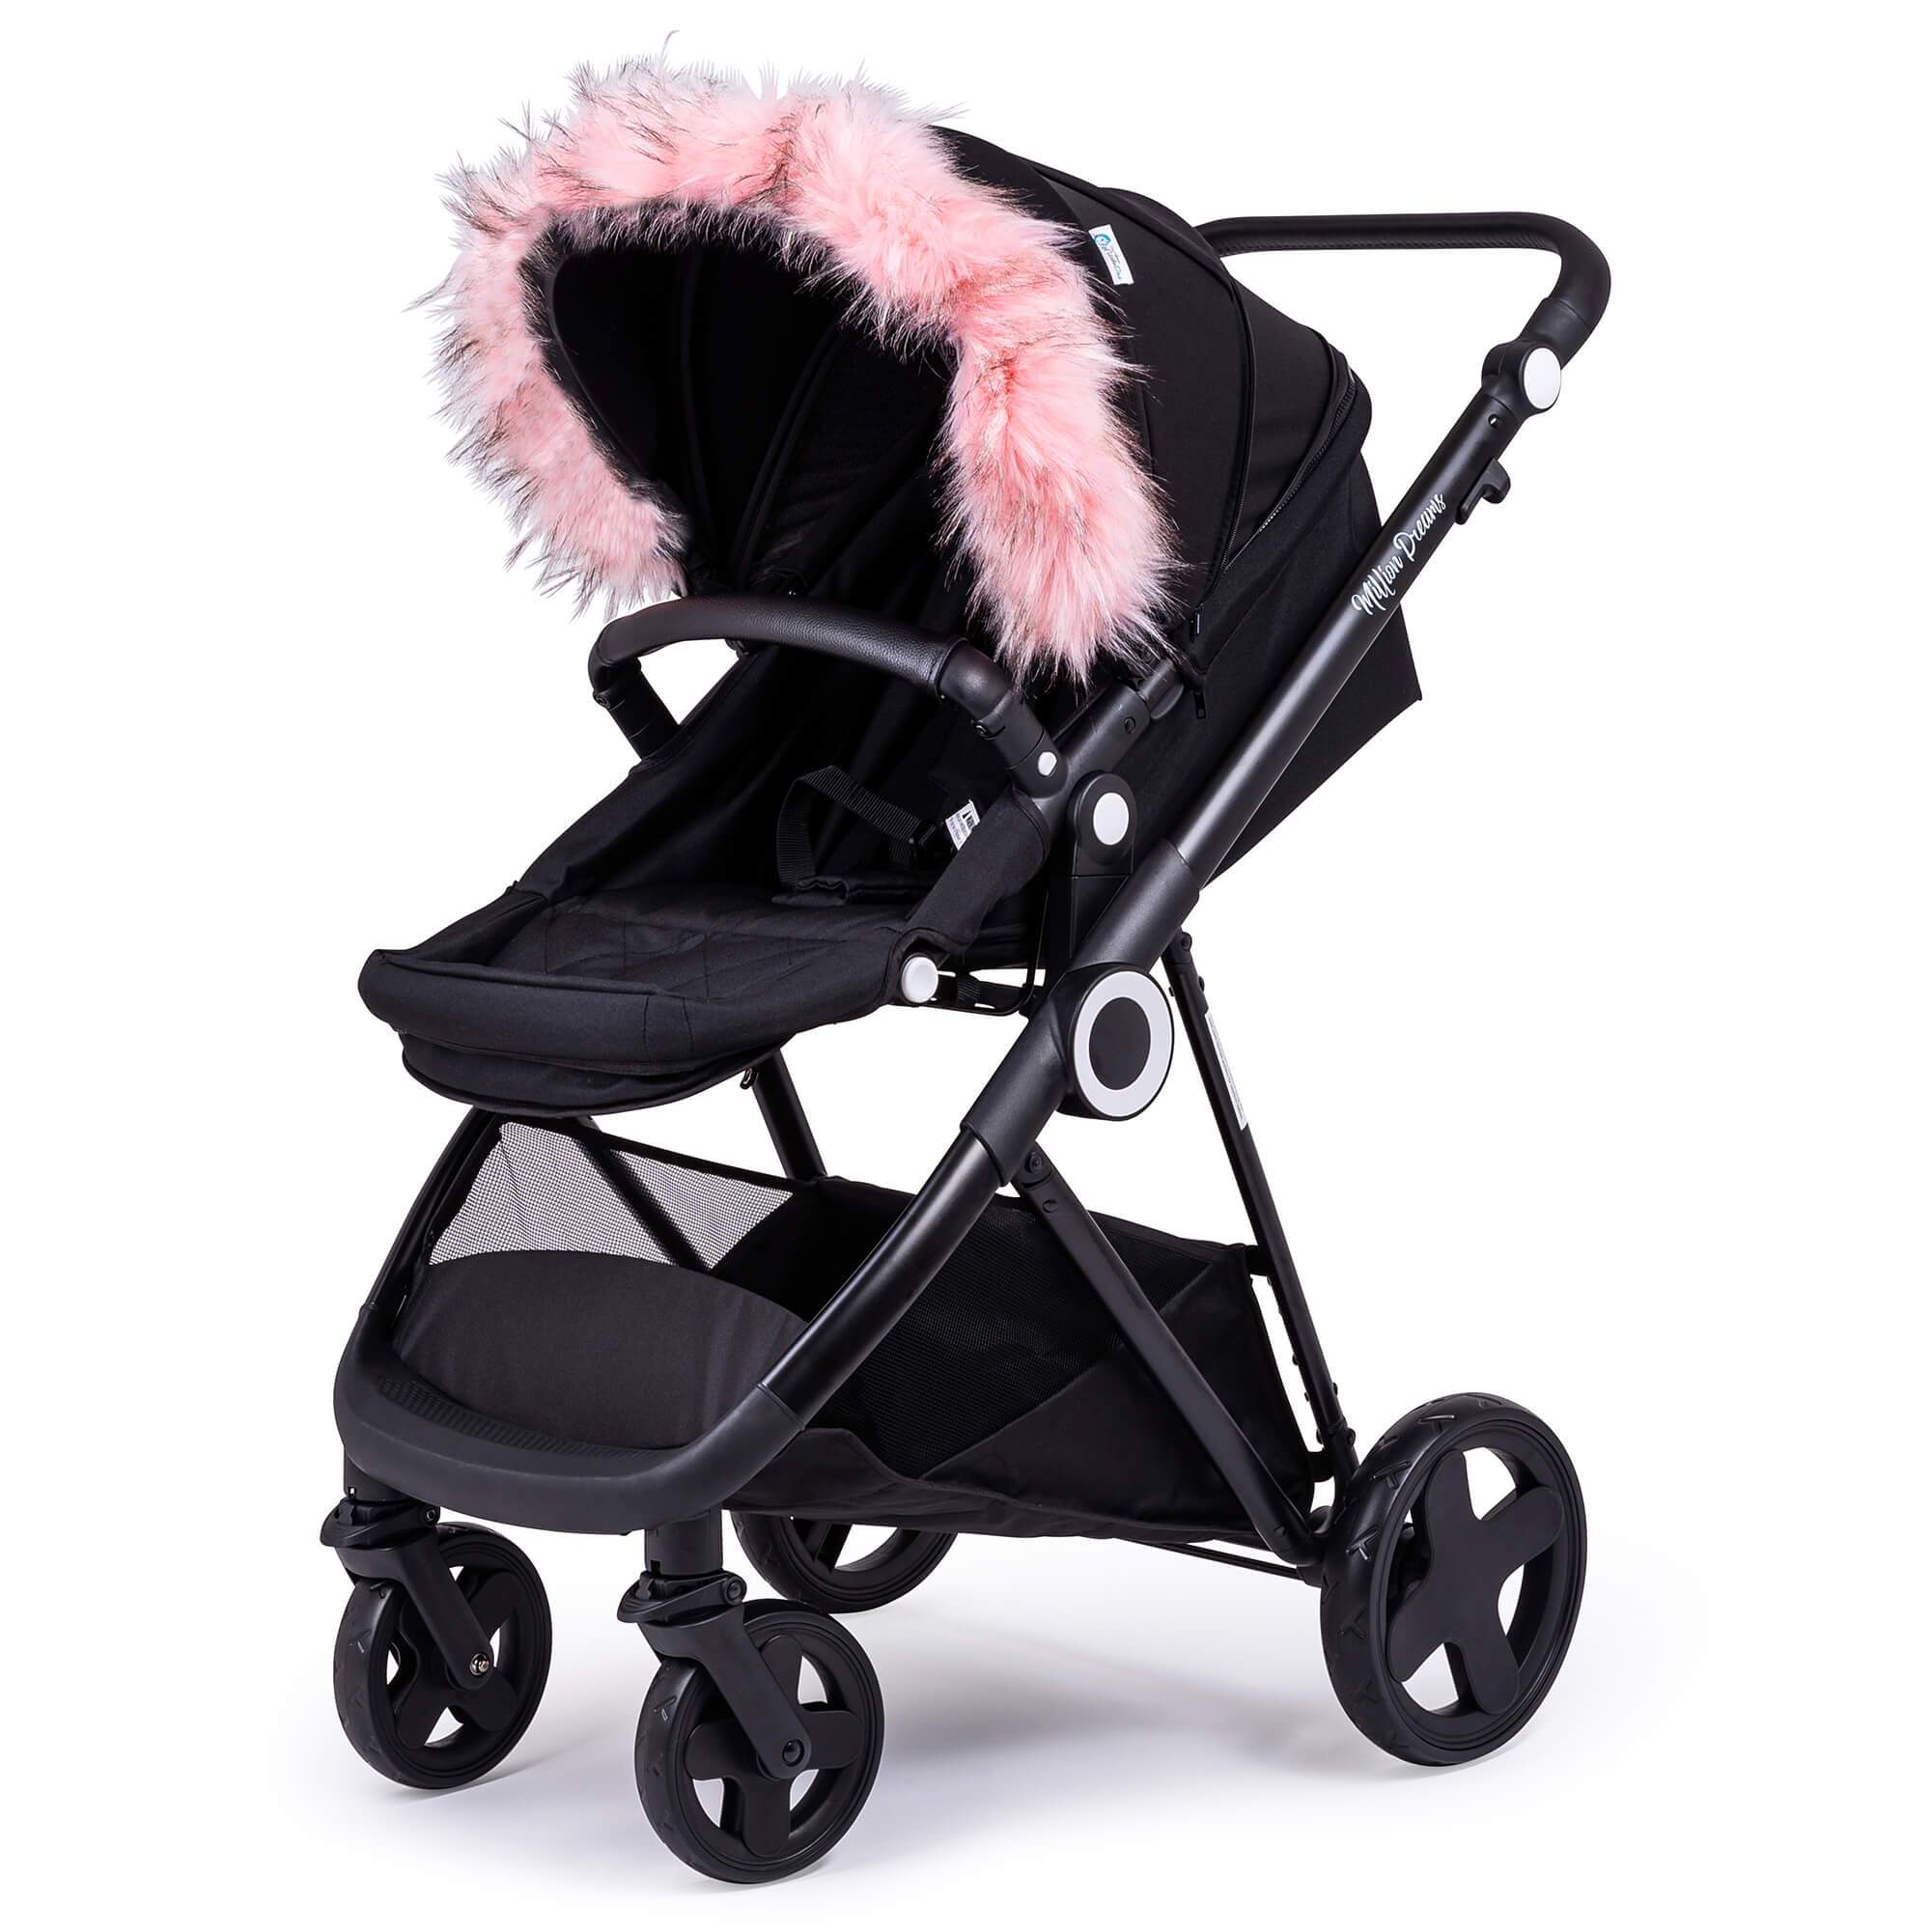 Pram Fur Hood Trim Attachment for Pushchair Compatible with Graco - Light Pink / Fits All Models | For Your Little One